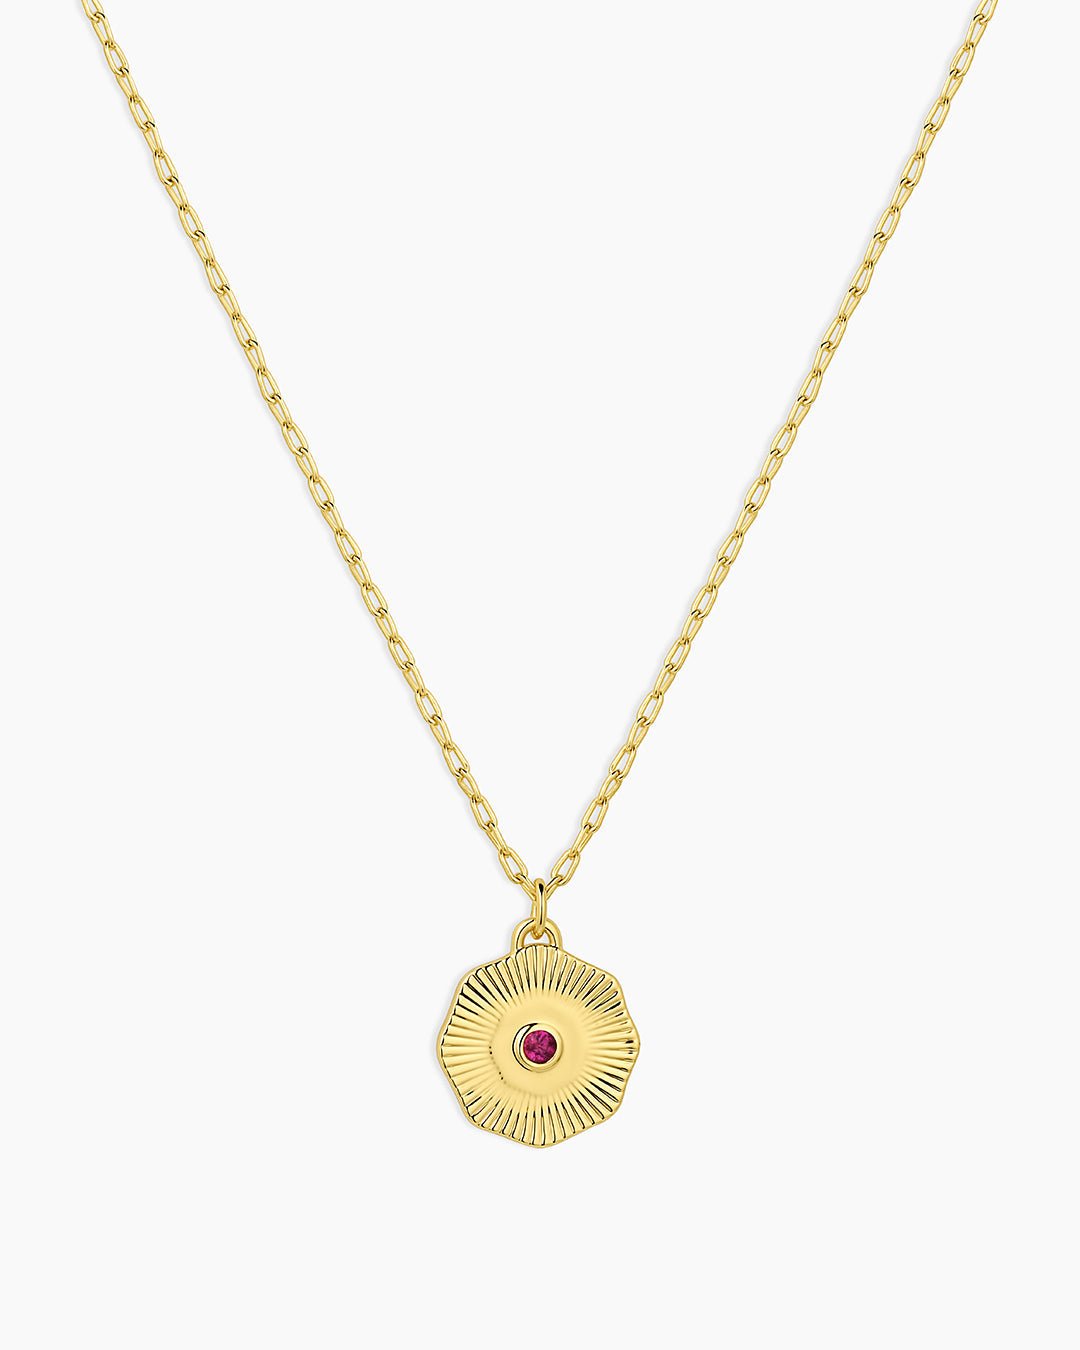 Birthstone Coin Necklace || option::Gold Plated, Ruby - July